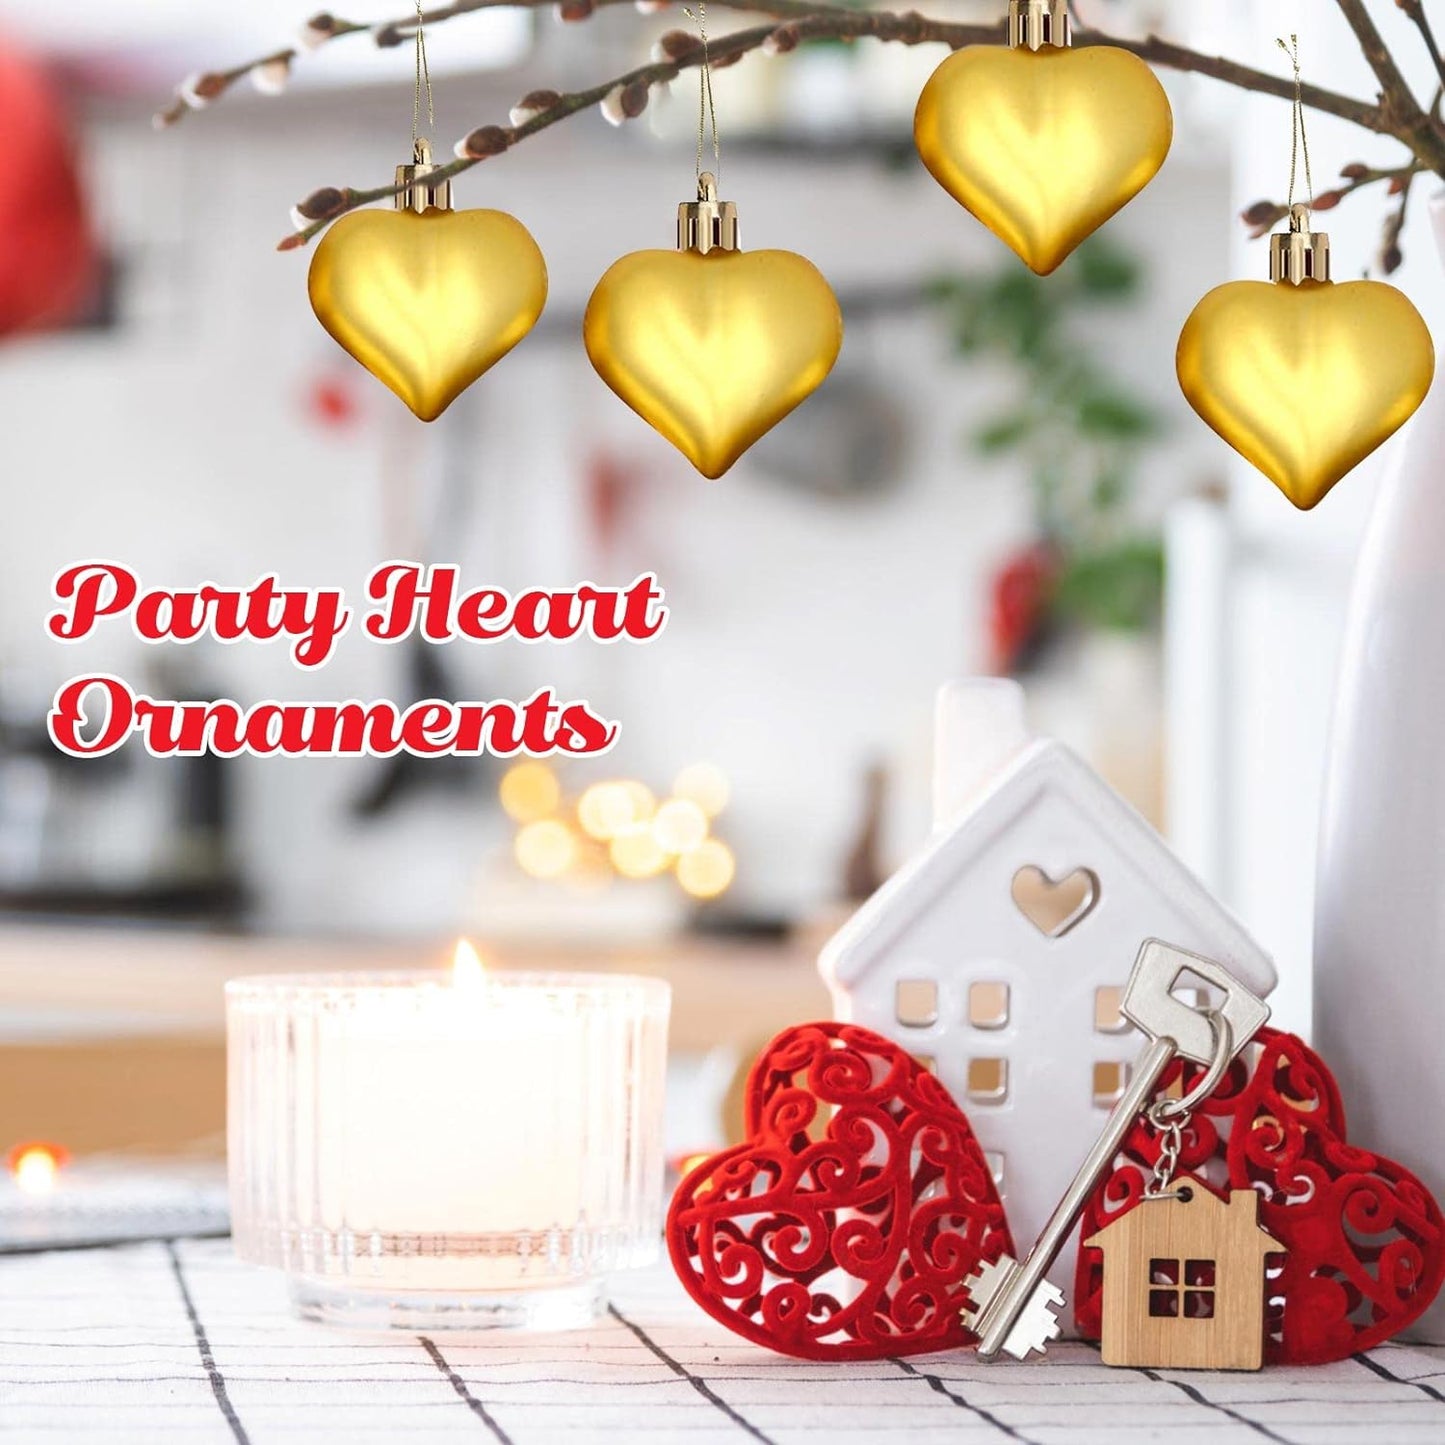 New Romantic Heart Shaped Hanging Ornaments, Party Ornaments of Plastic, Gold Heart Shaped Tree Decorations Hanging Baubles for Party, Valentine's Day, Wedding, Anniversary 【 6 PCS 】